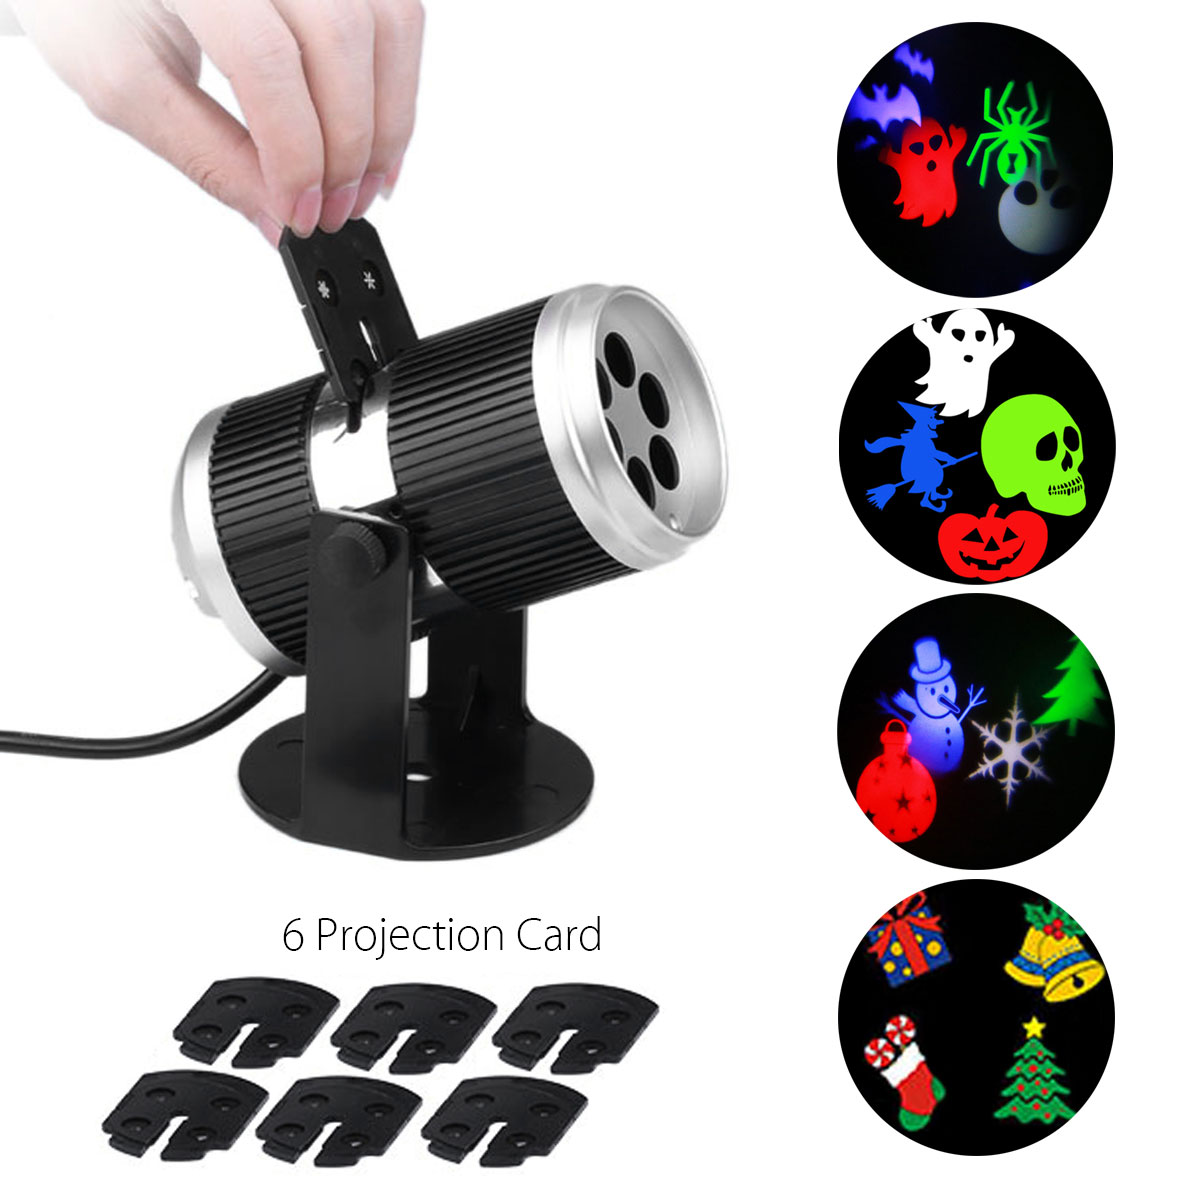 6-Patterns-4W-LED-Stage-Light-Projector-Lamp-Landscape-Garden-Decor-for-Halloween-Christmas-Decorati-1193828-2